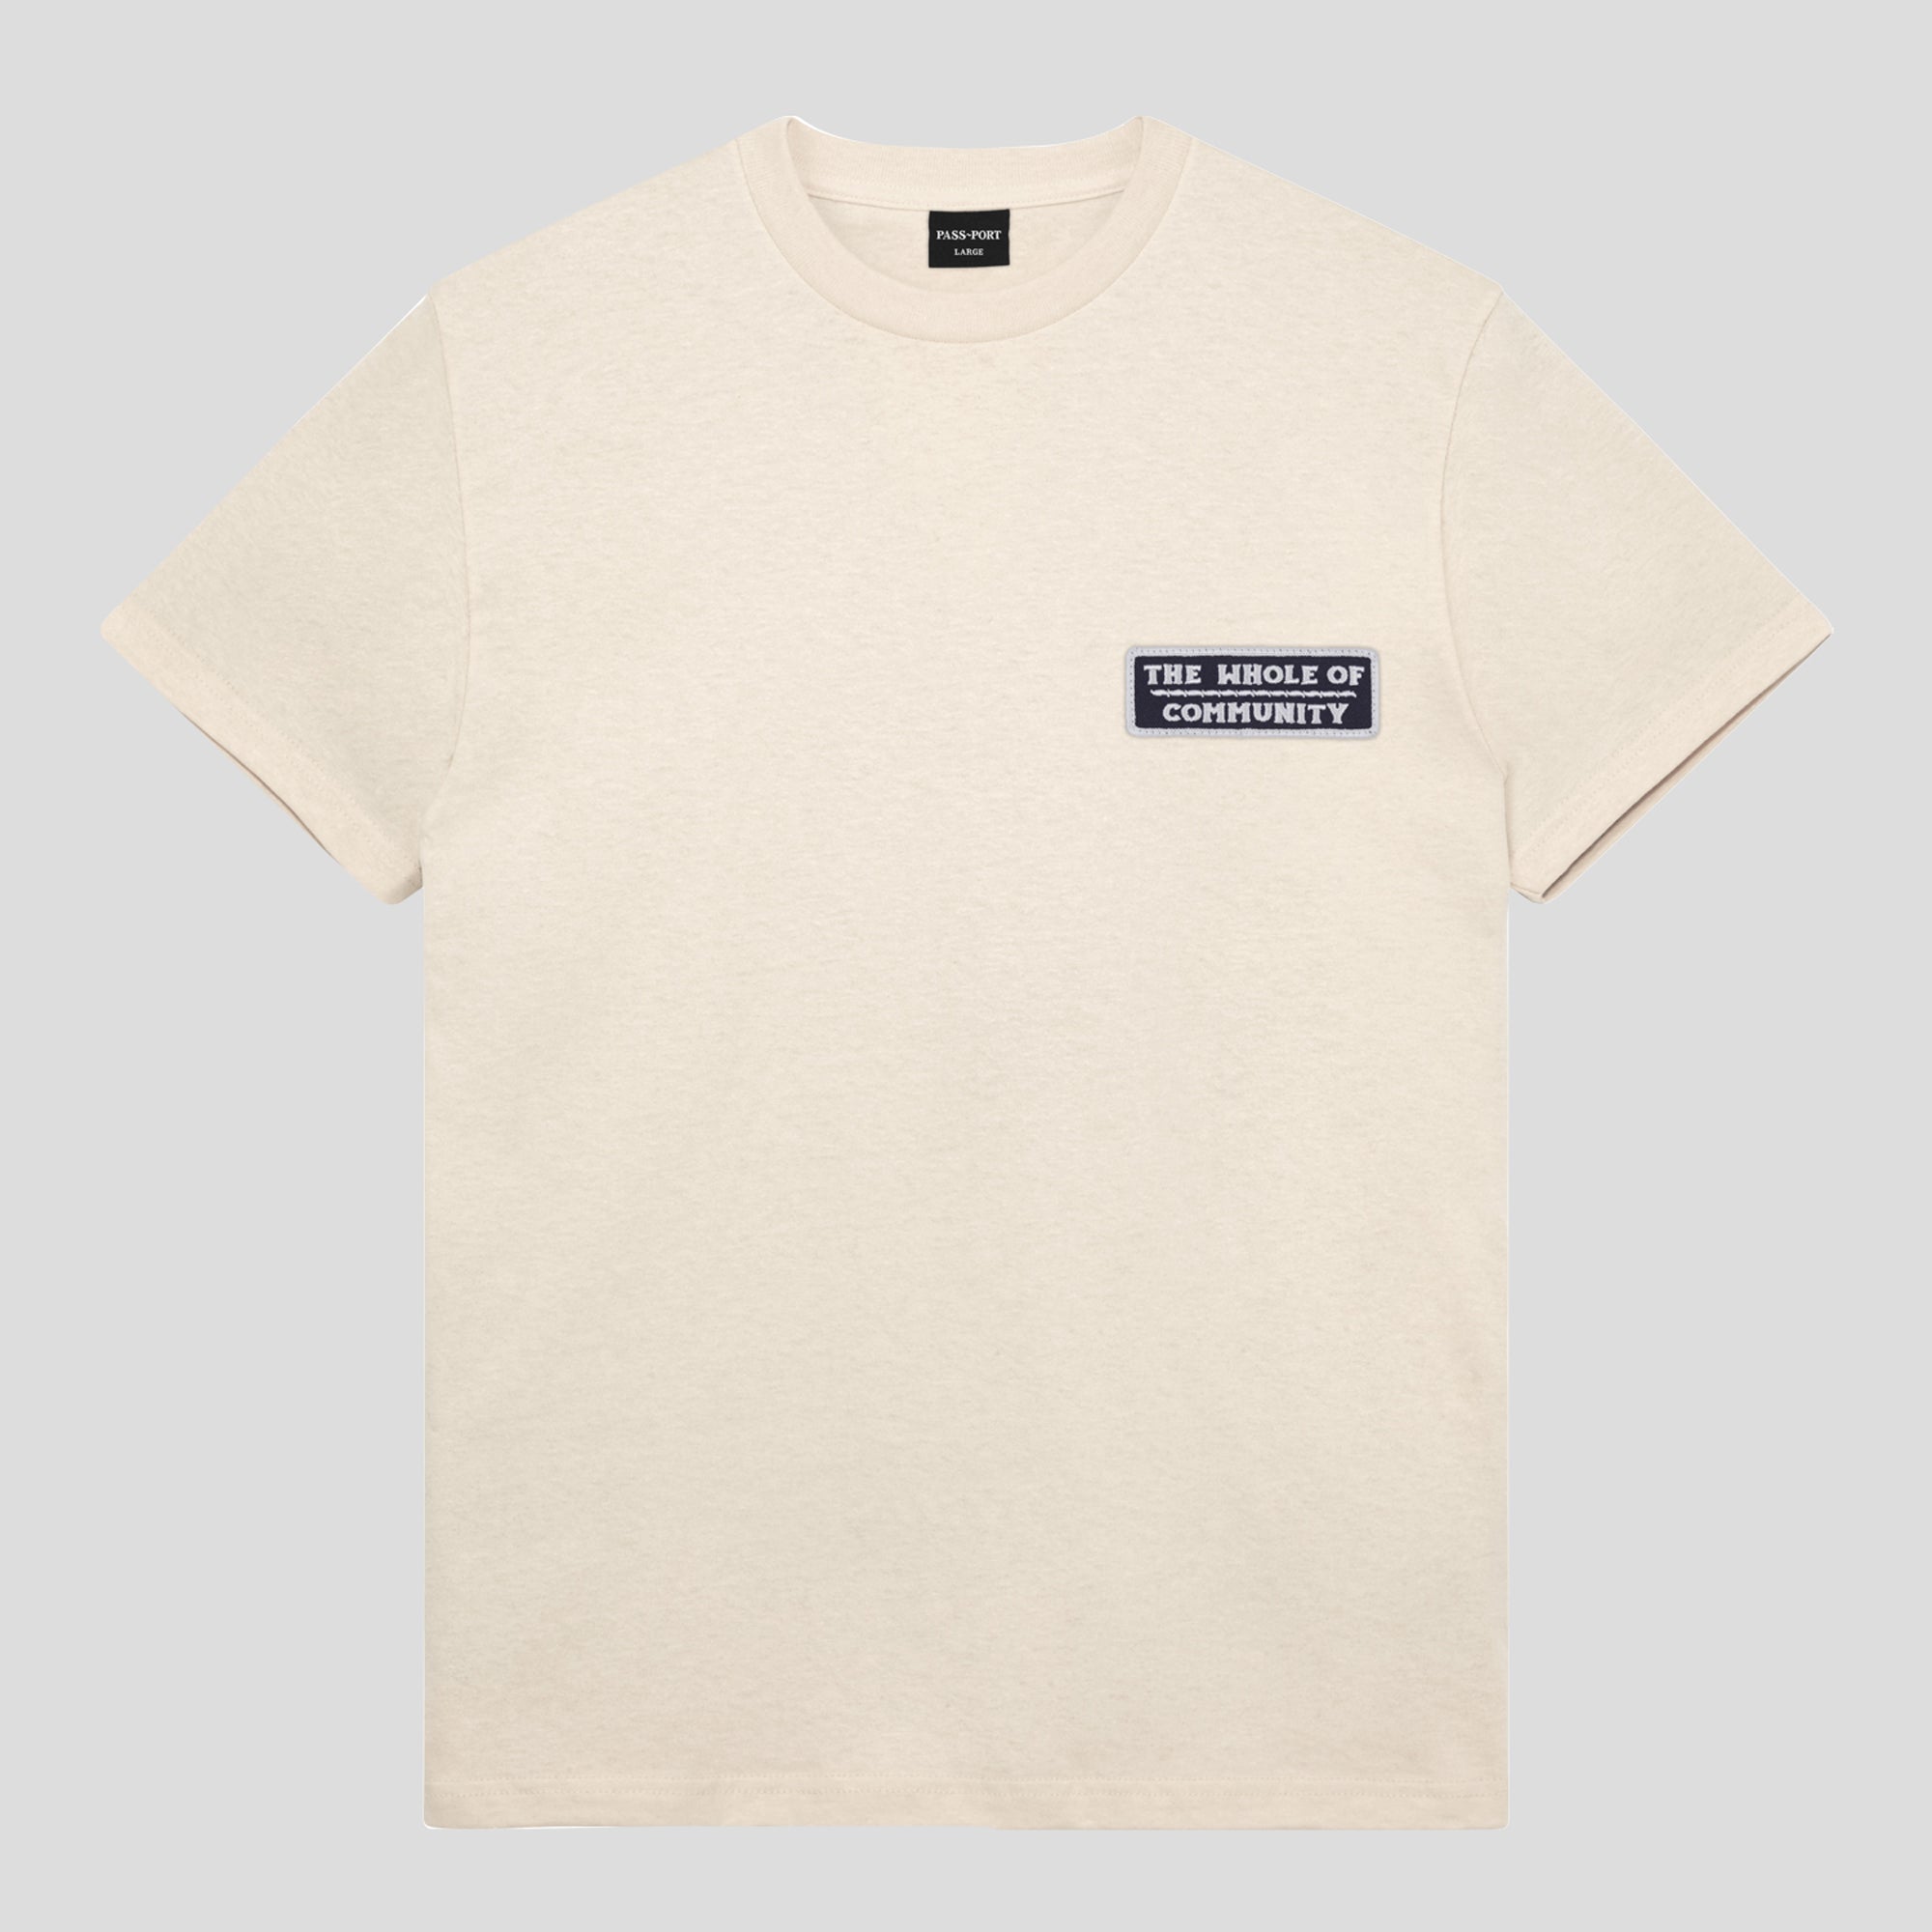 PASS~PORT "WHOLE OF COMMUNITY" TEE NATURAL